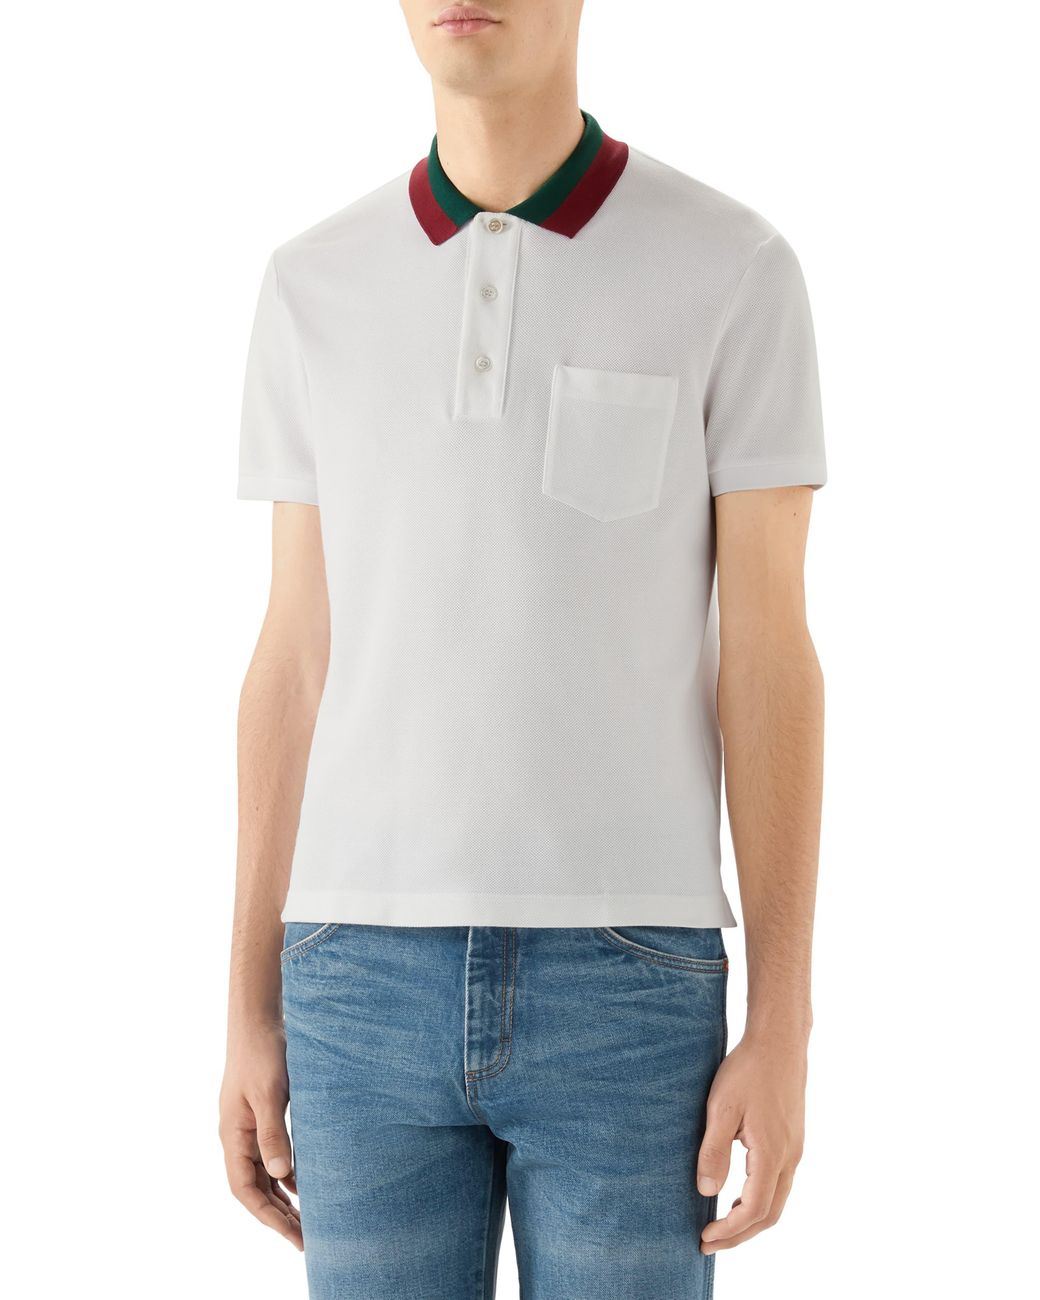 Gucci Two-tone Collar Short Sleeve Piqué Polo in White/ Green/ Red ...